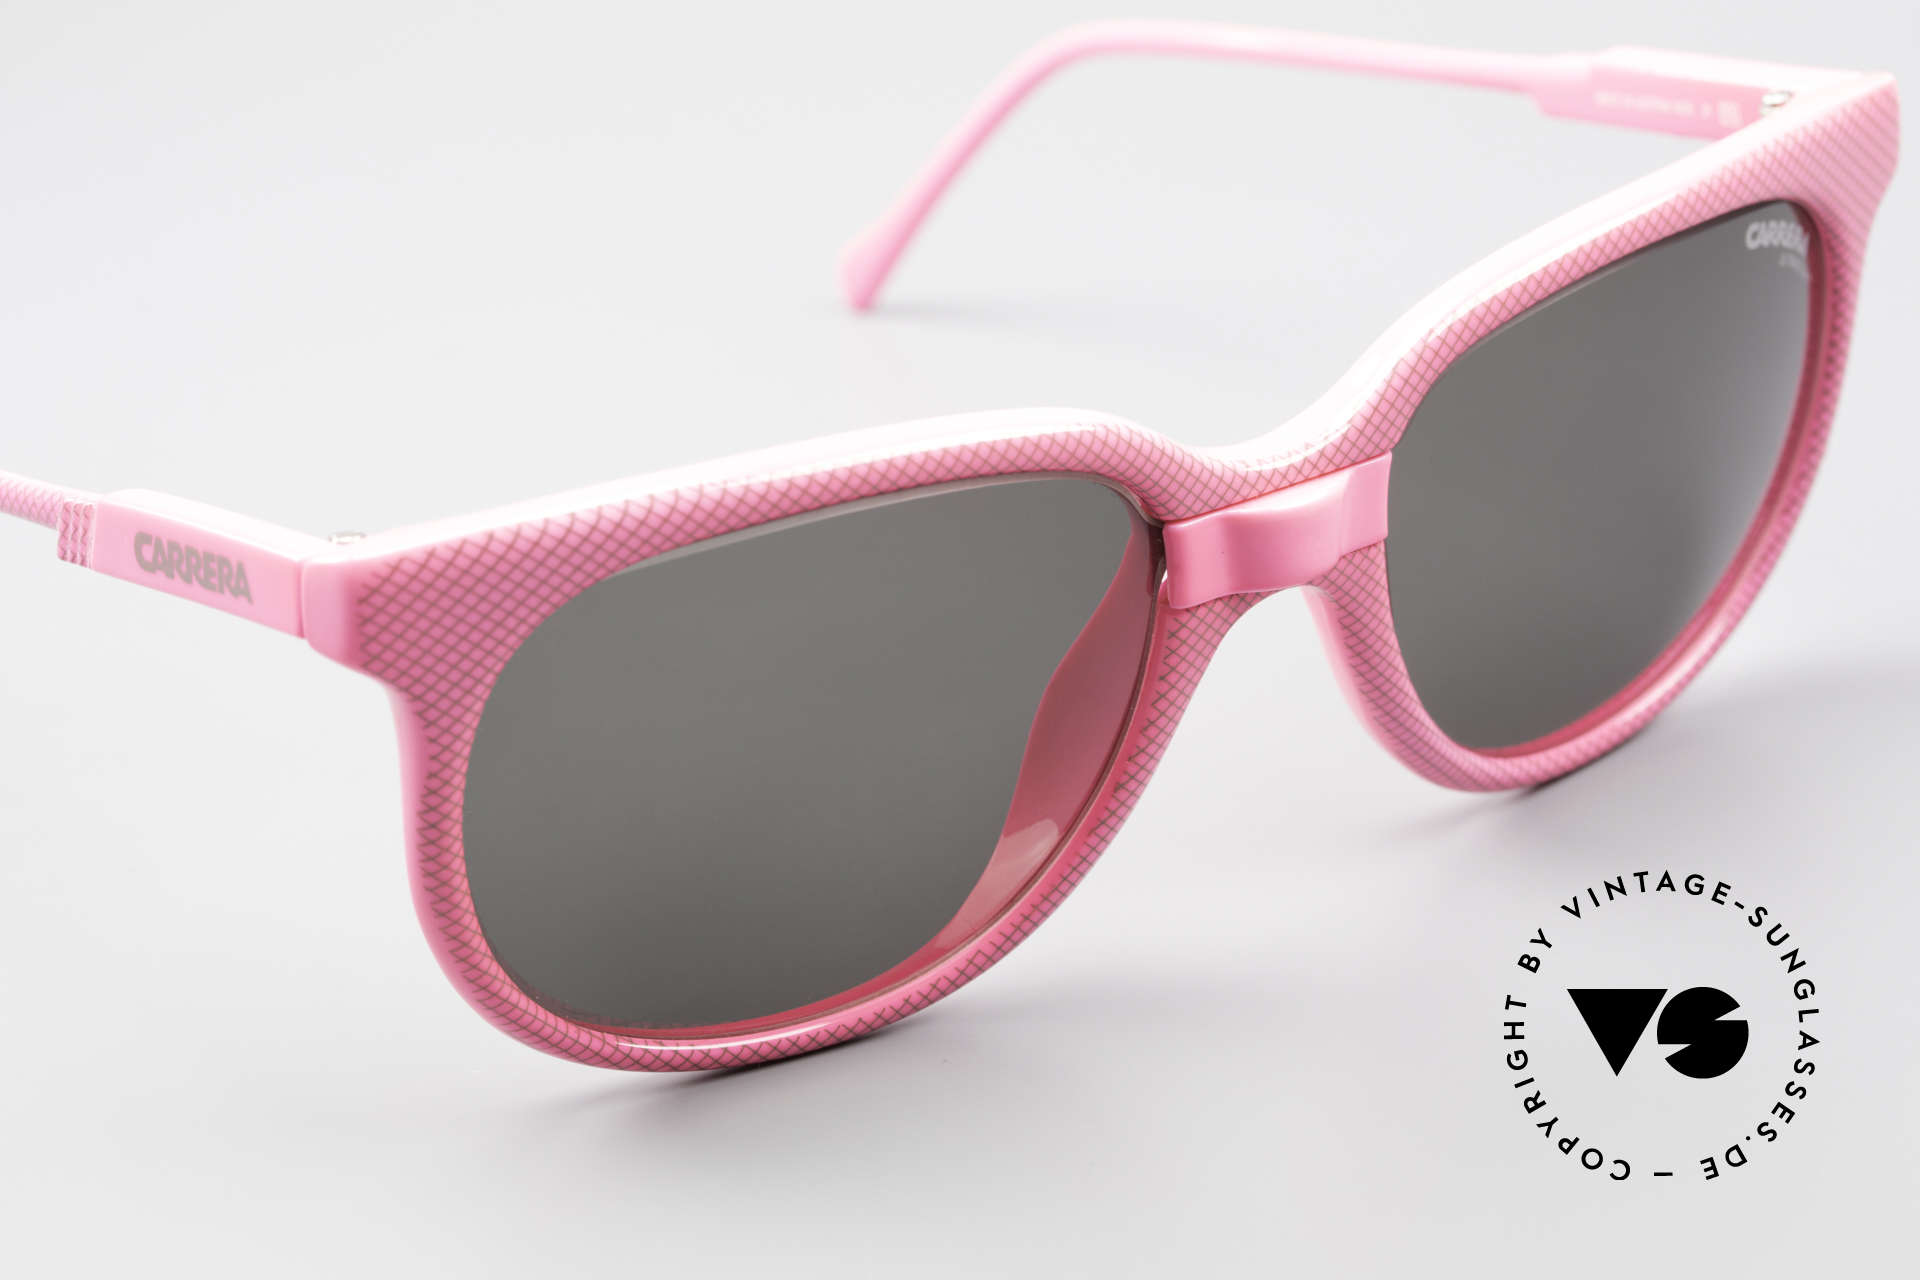 Carrera 5426 Pink Ladies Sports Sunglasses, new old stock (like all our 80's Carrera sunnies), Made for Women